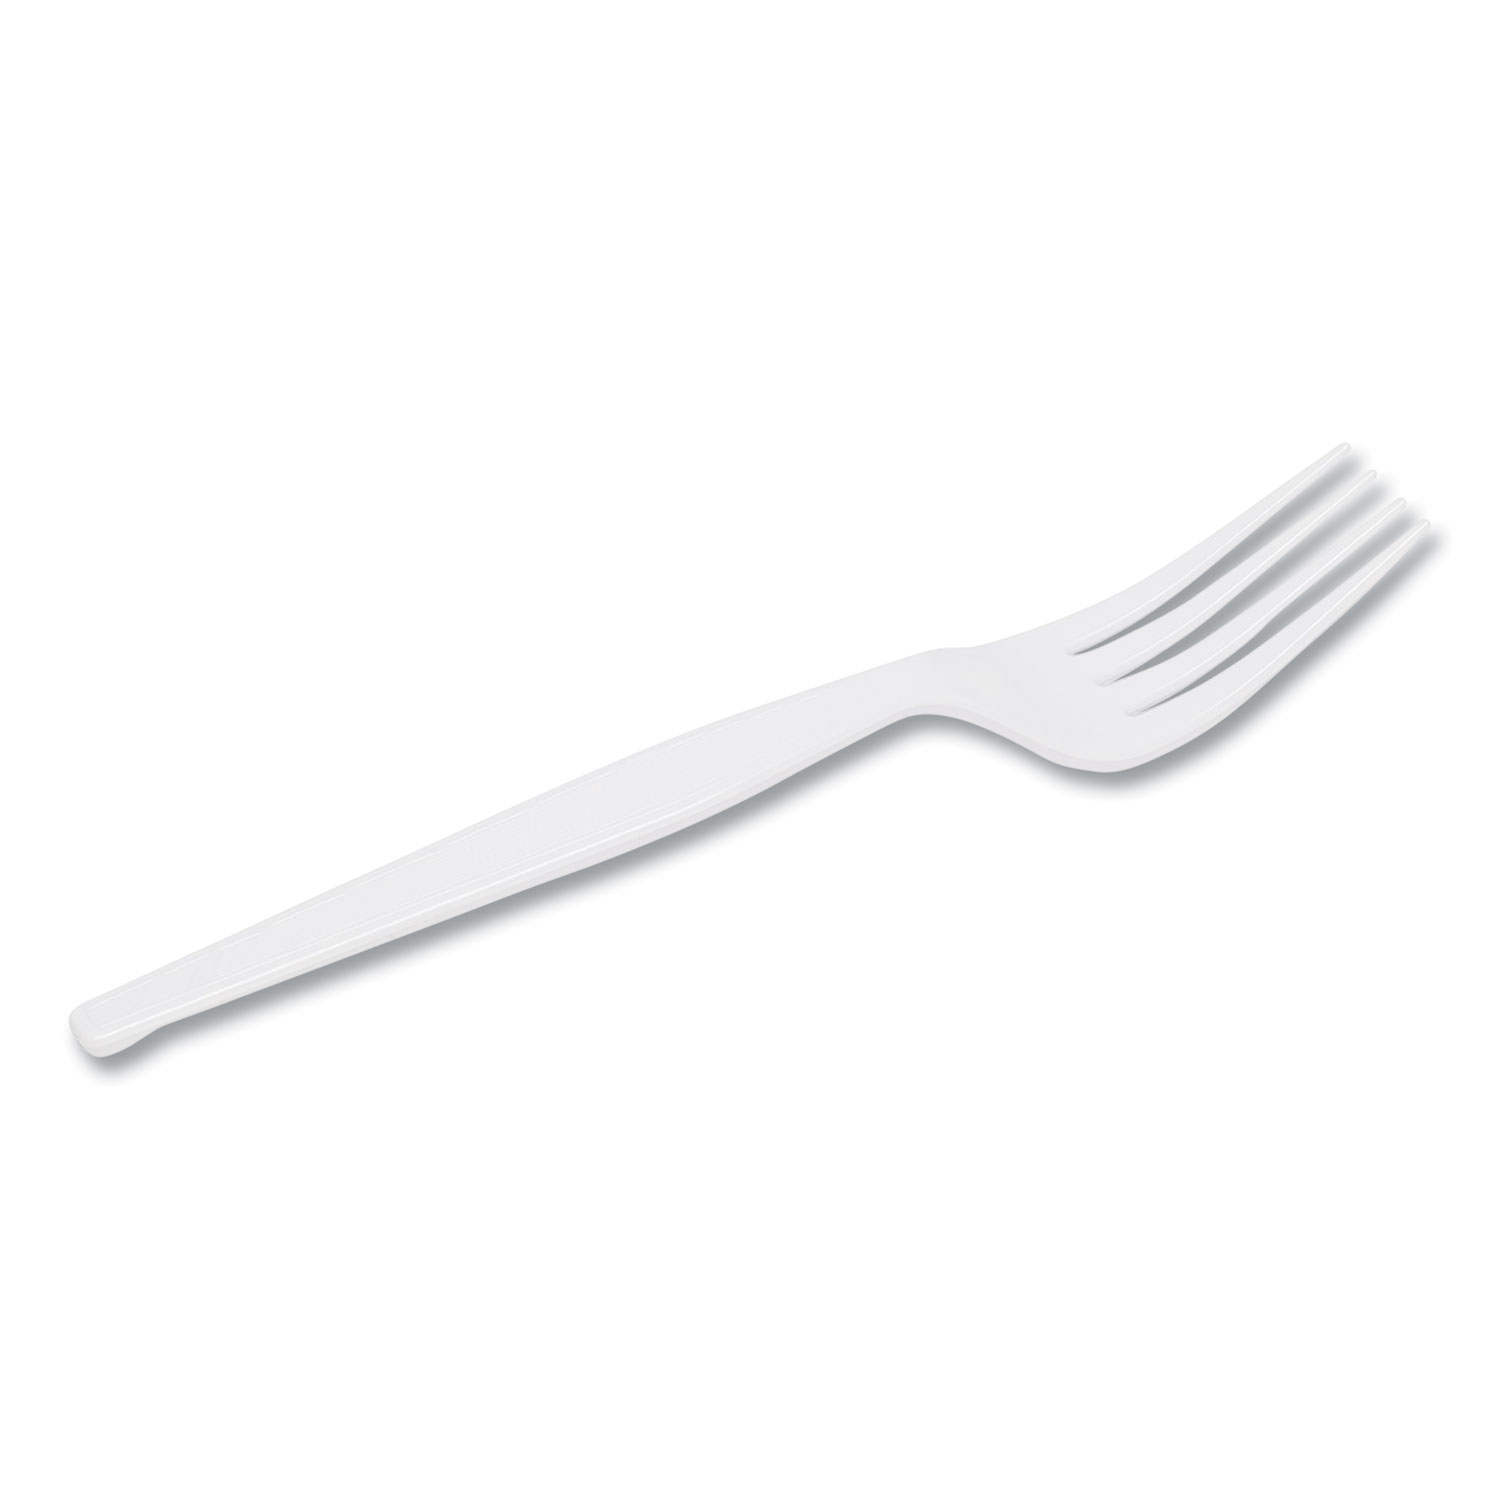 5 7//8 White PP Wrapped Medium Weight Polypropylene Daxwell Plastic Forks Case of 1,000 A10001485